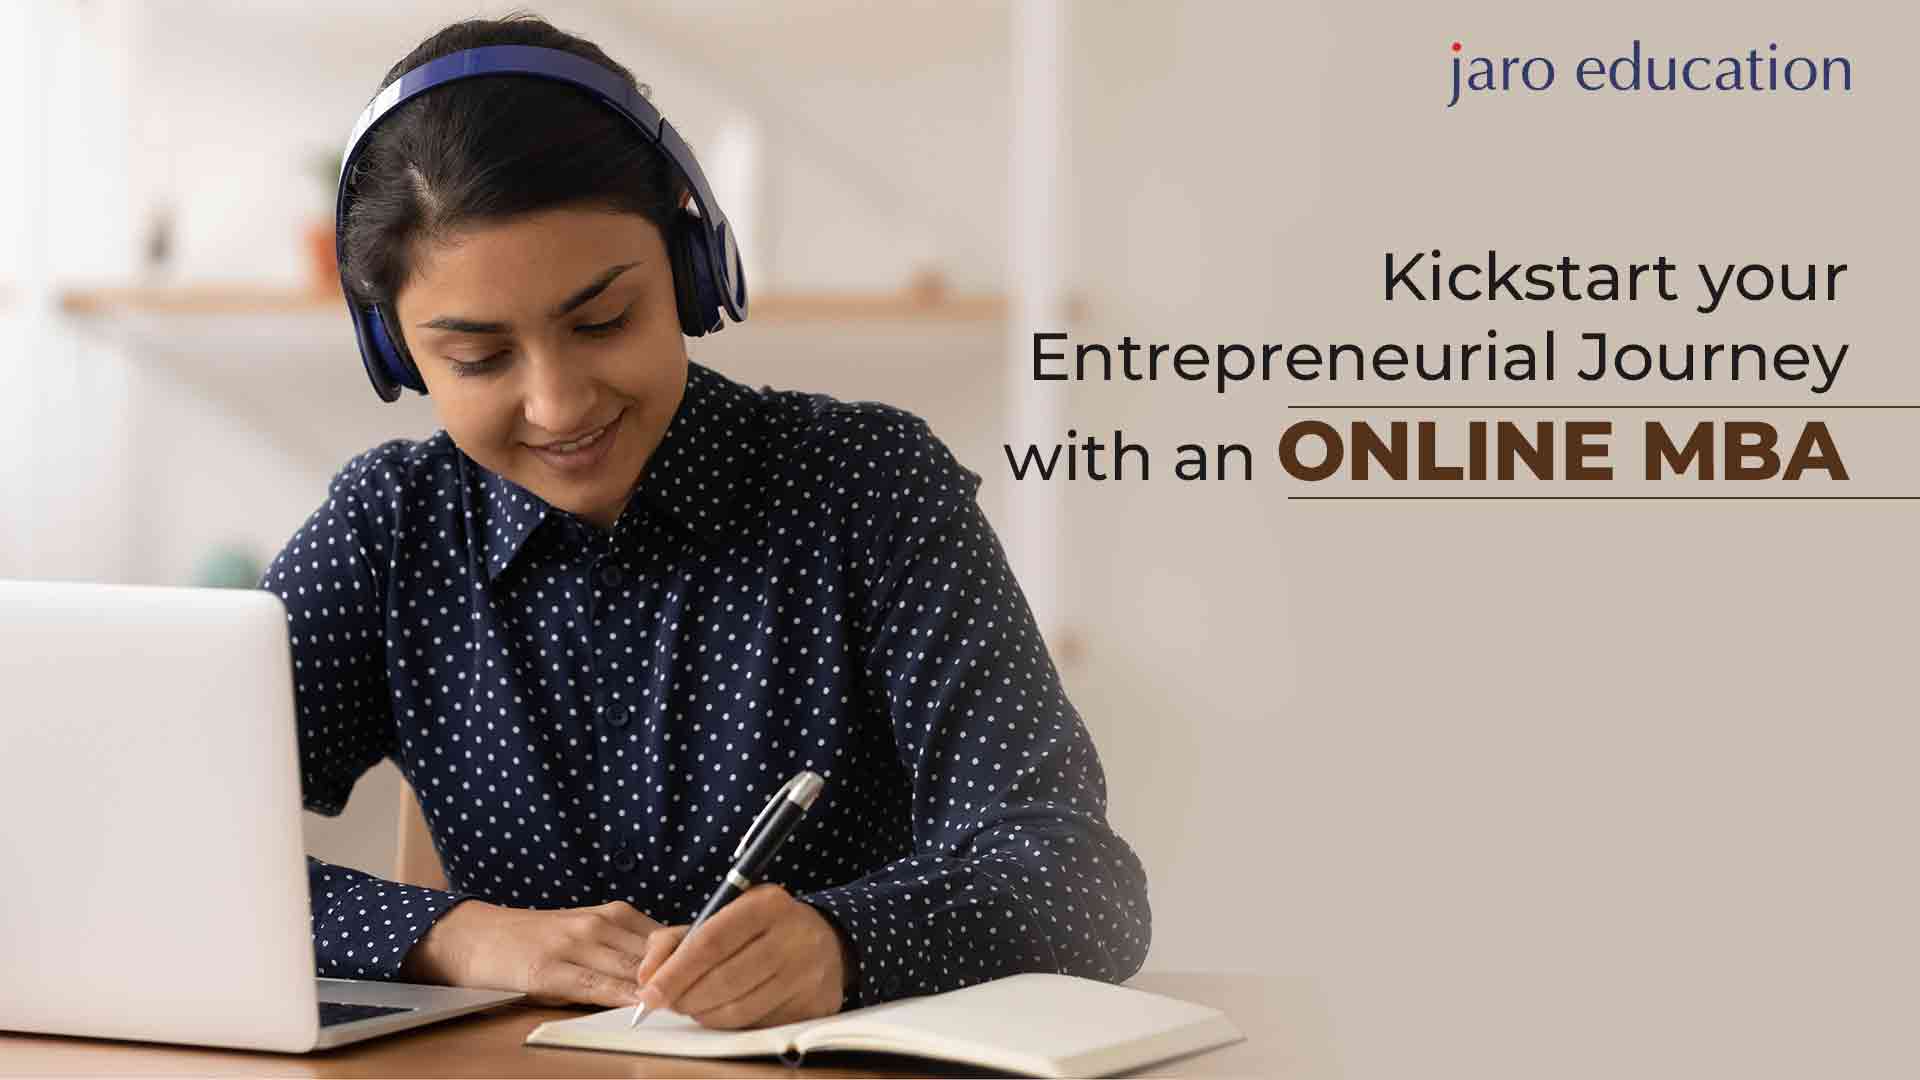 Kickstart your Entrepreneurial Journey with an Online MBA